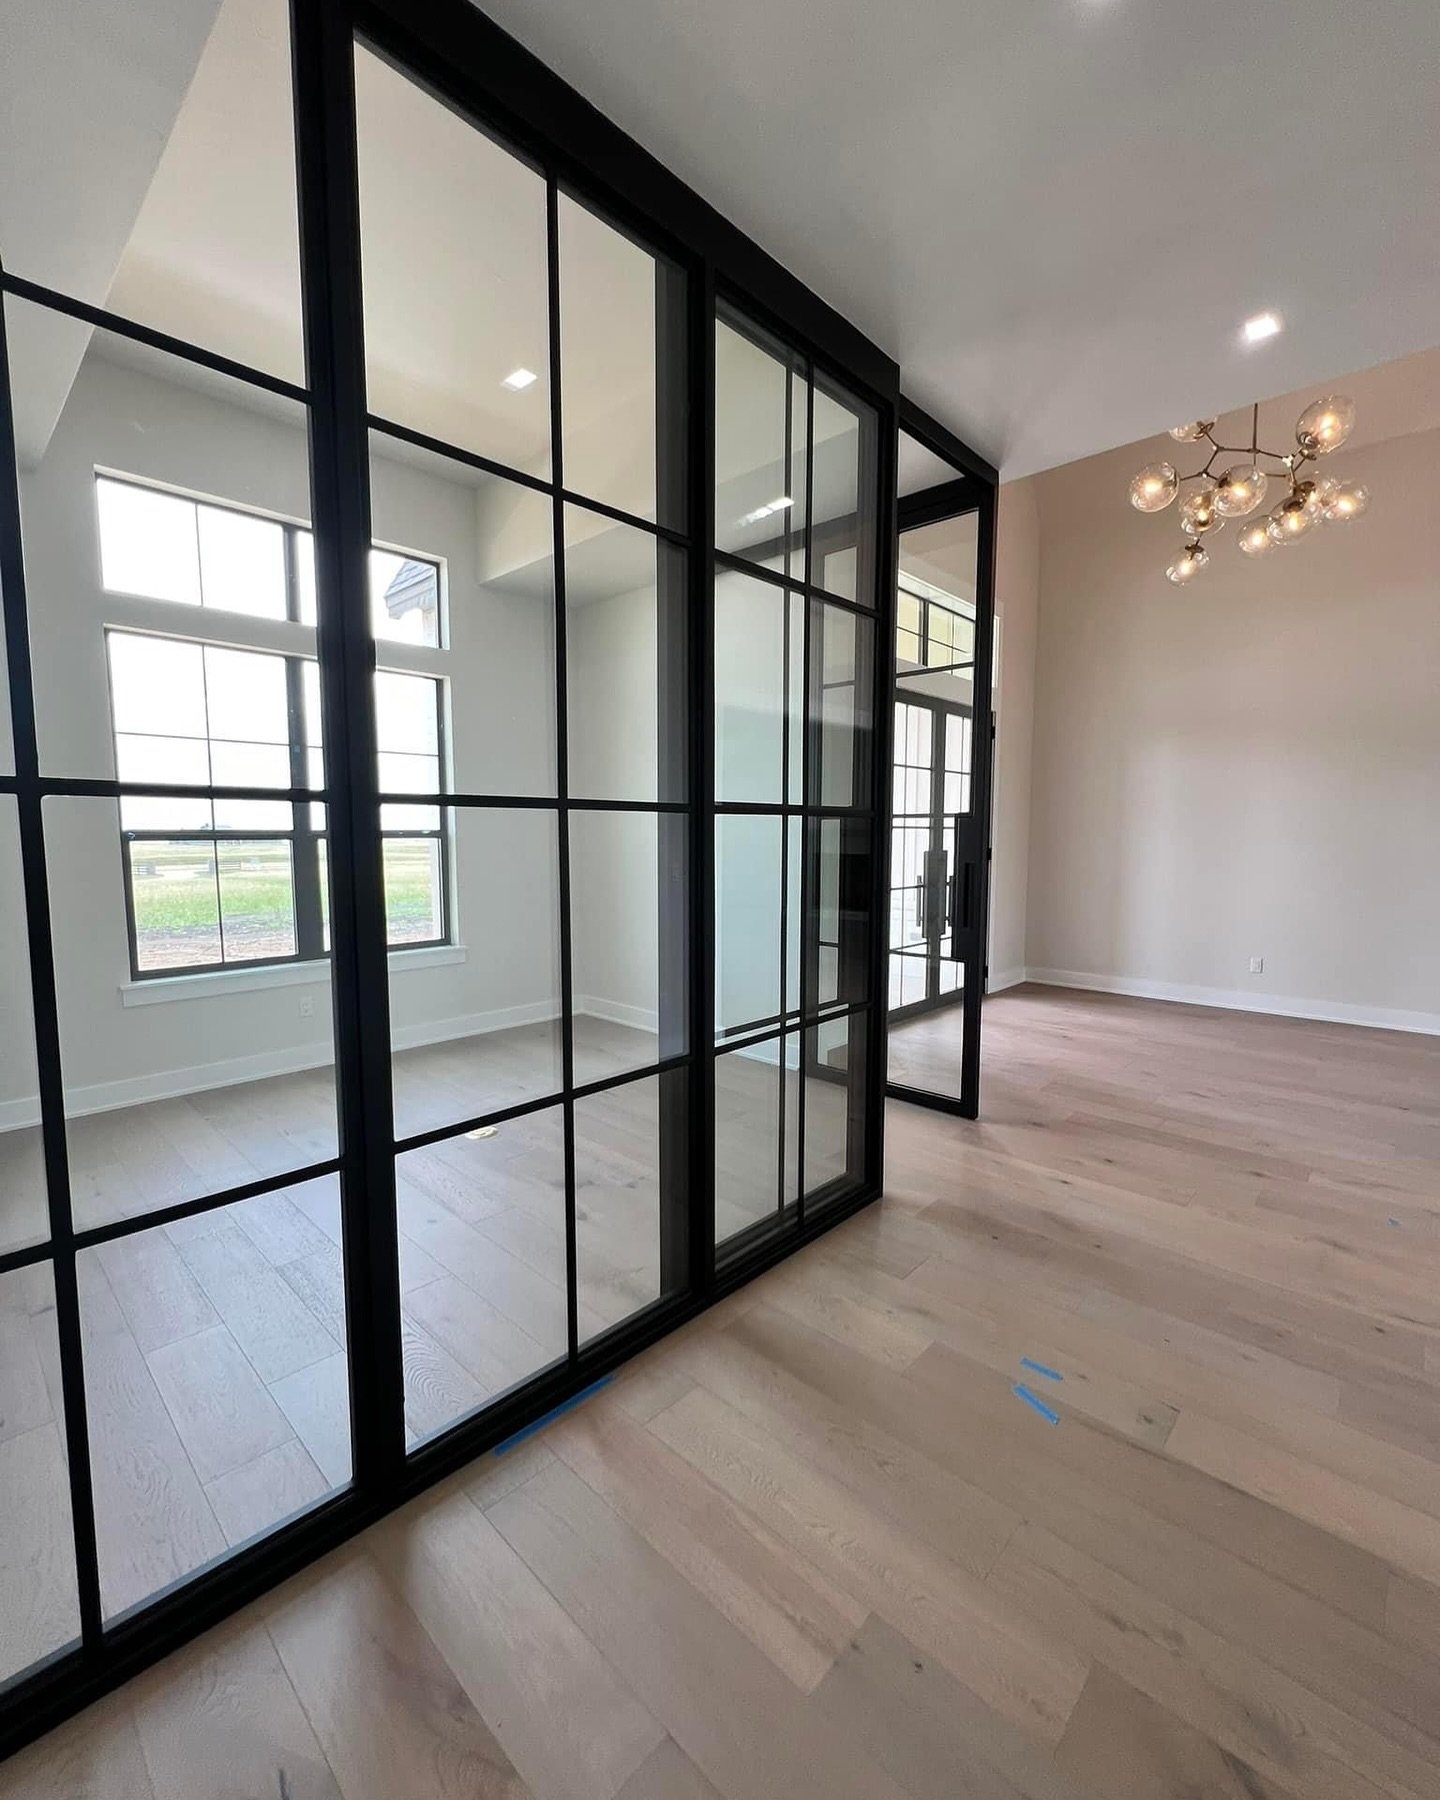 Do you have an empty open space in your home? We can help transform into your personal office, gym, game room, etc. 
Interior Doors can give you privacy and add style to any home.

Contact us to schedule your free in-home visit ✍🏻
📞 210-651-3201 📧